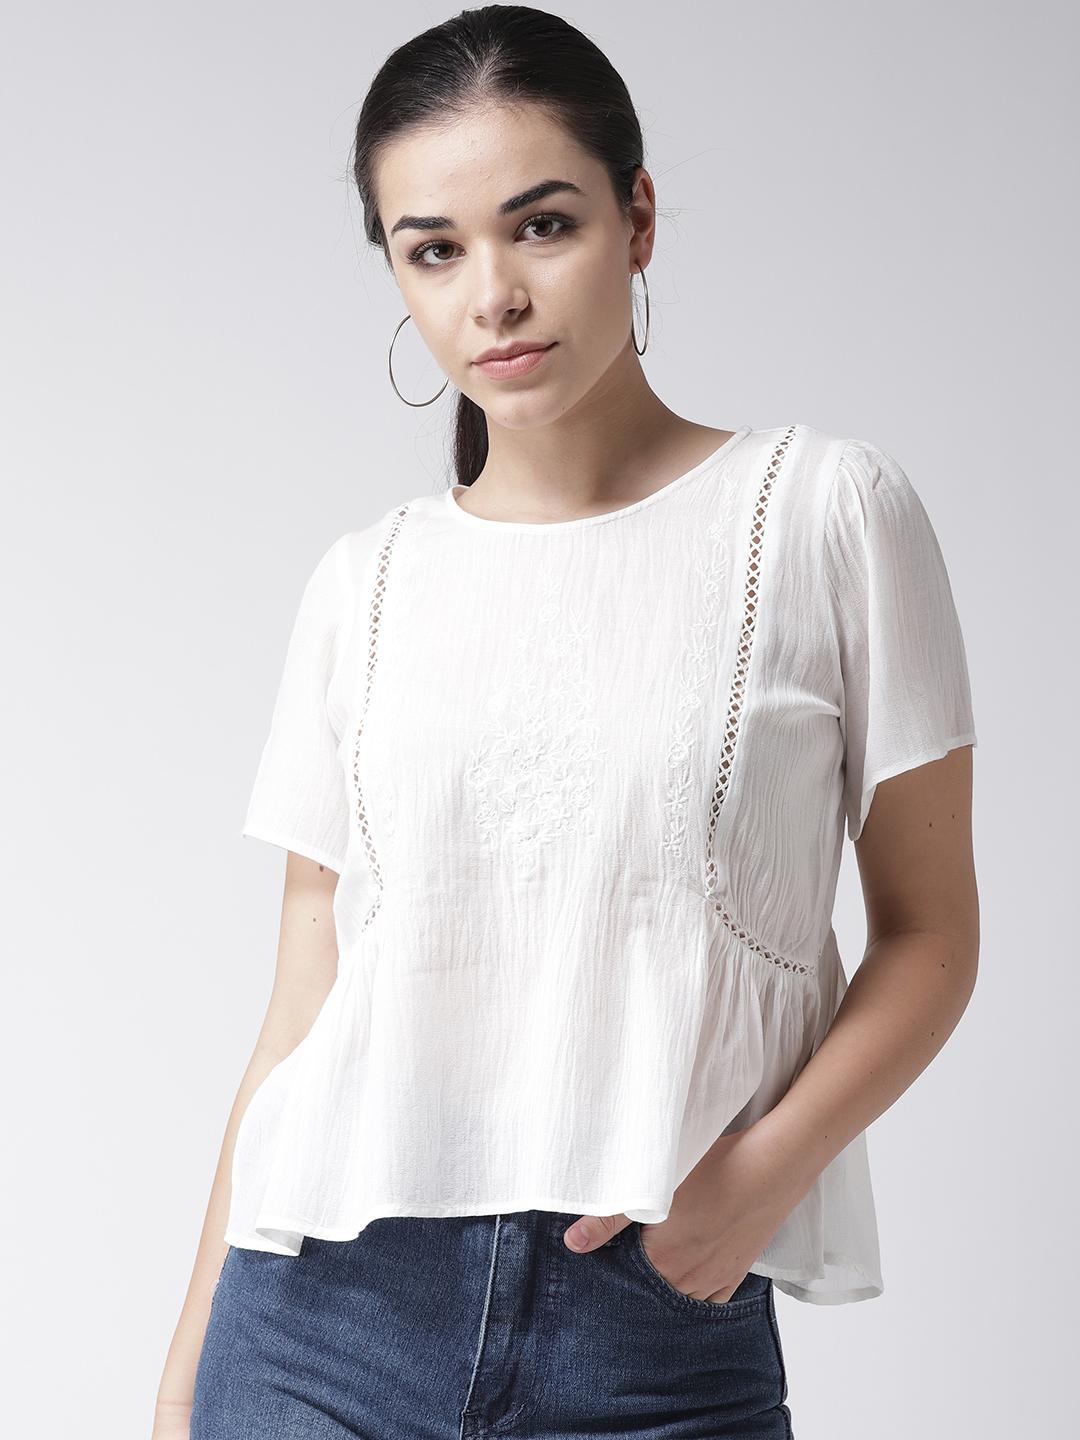 Embroidered Lace Insert Top